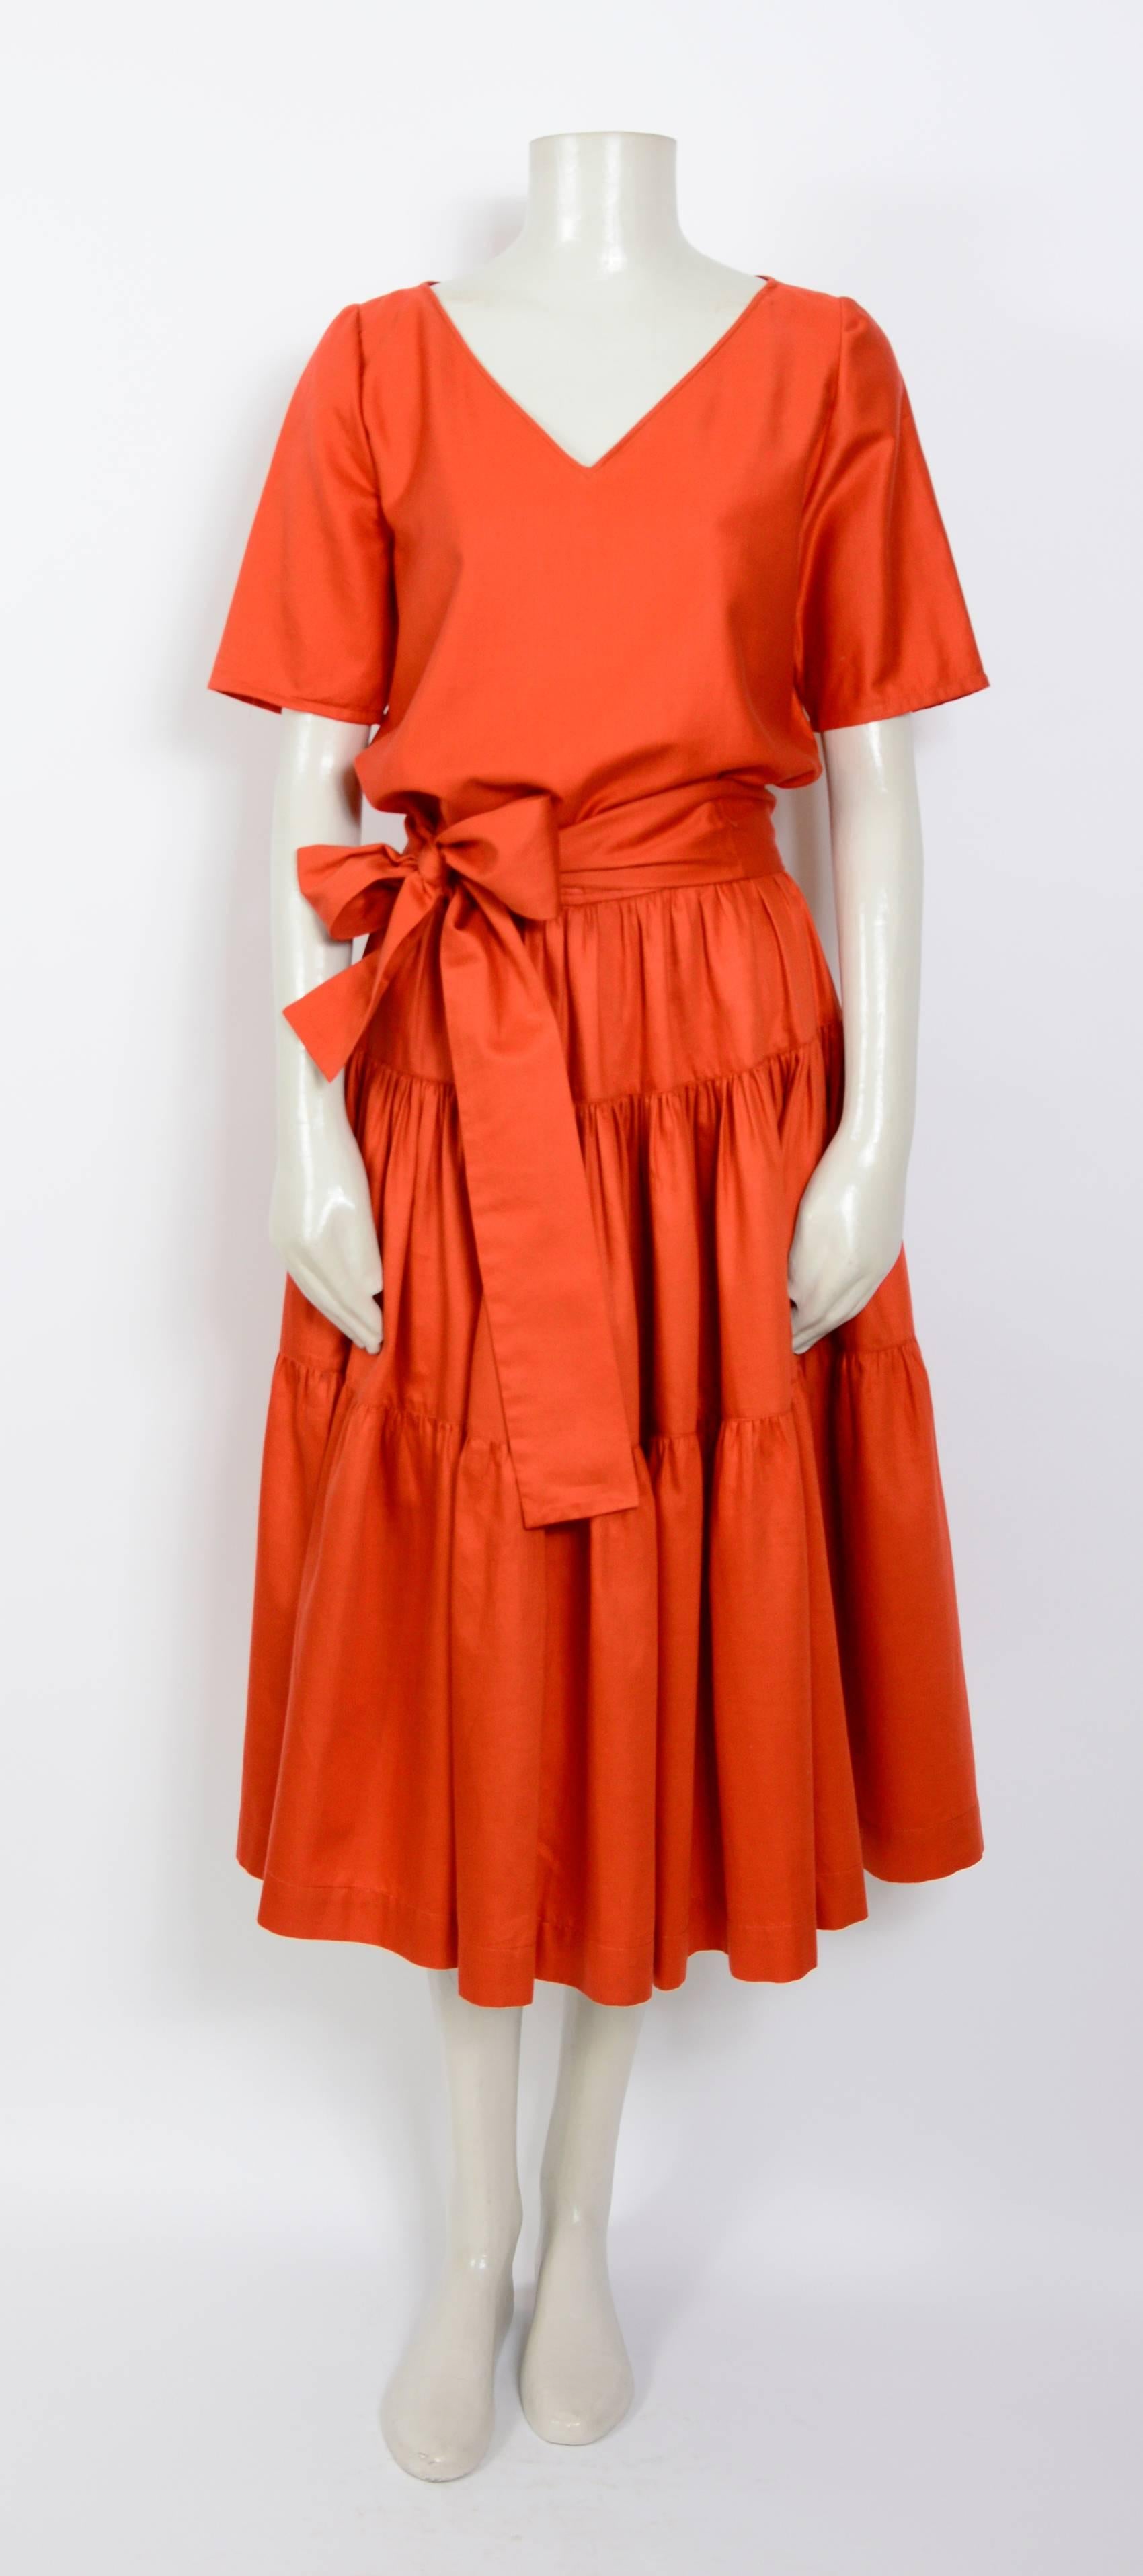 A fabulous 1960's top and skirt from YSL Rive Gauche in Redstone red polished cotton. The skirt has a fitted waistband, 3 gathered panels each widening towards the hem making it fuller and a wide tie belt. The top slips on over the head and the